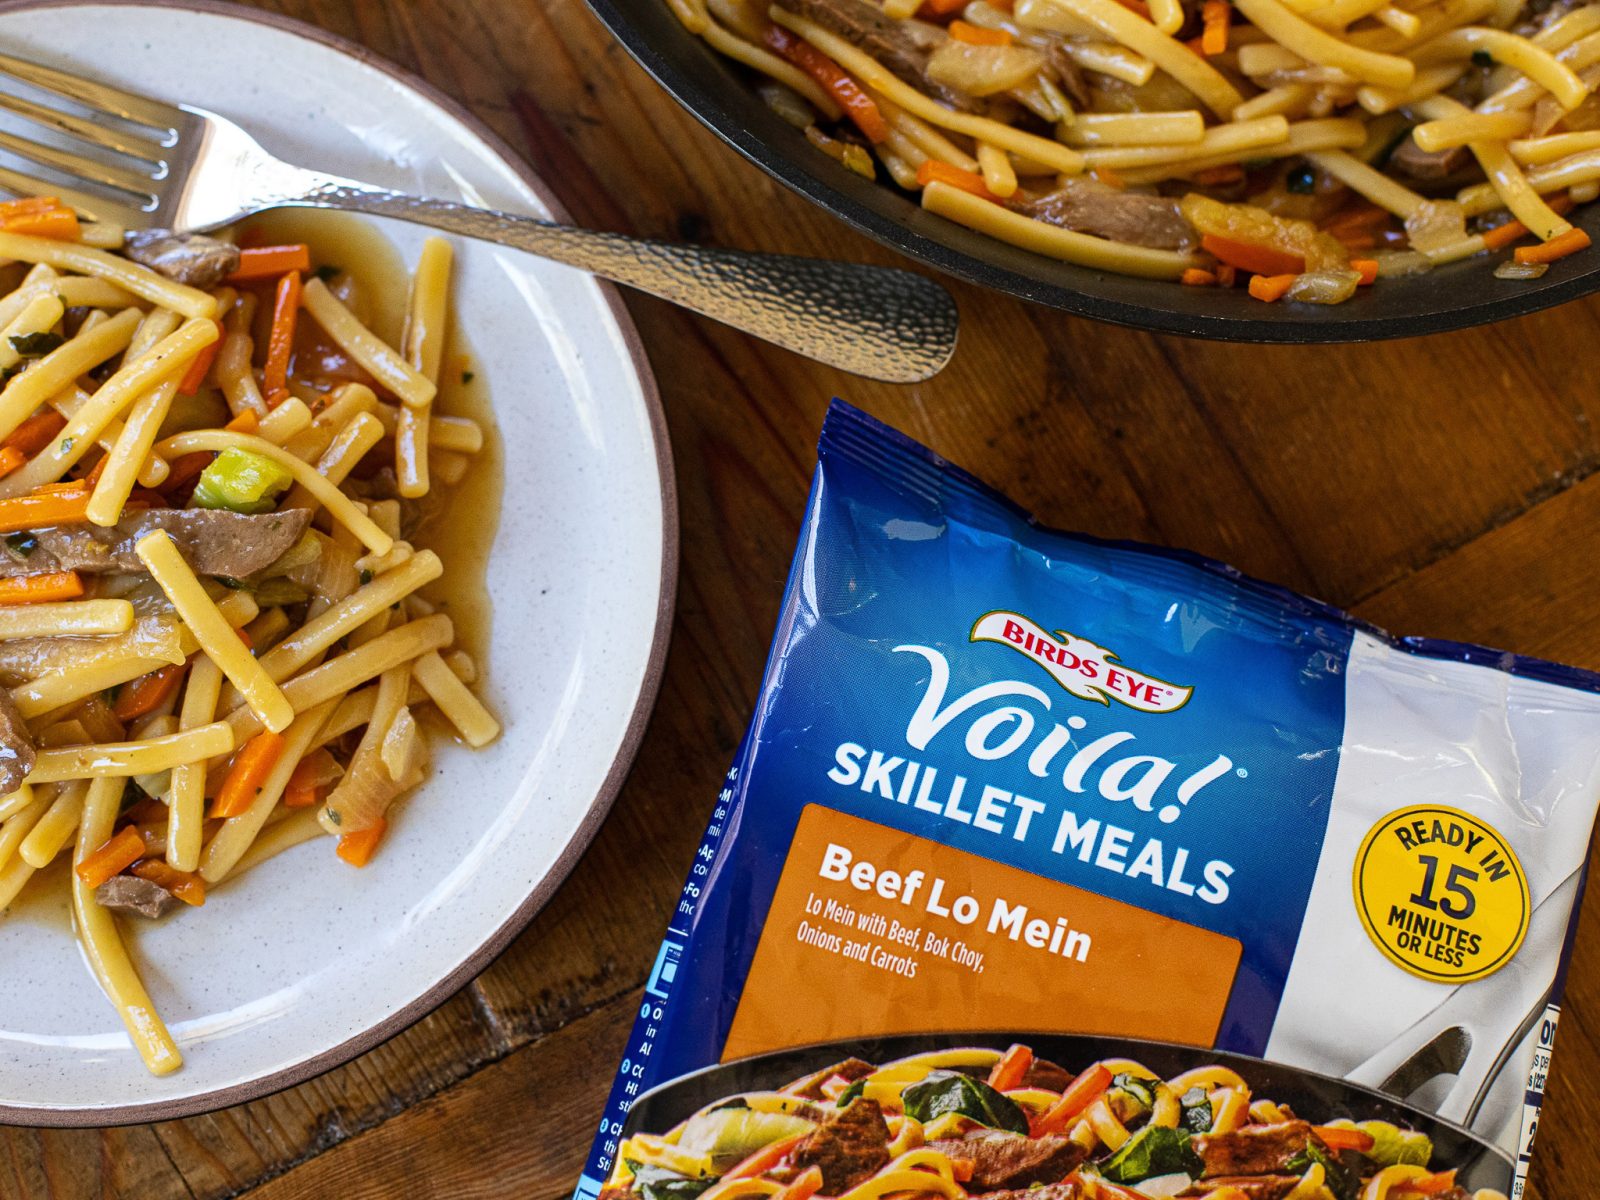 Birds Eye Voila Skillet Meal As Low As 72¢ At Publix